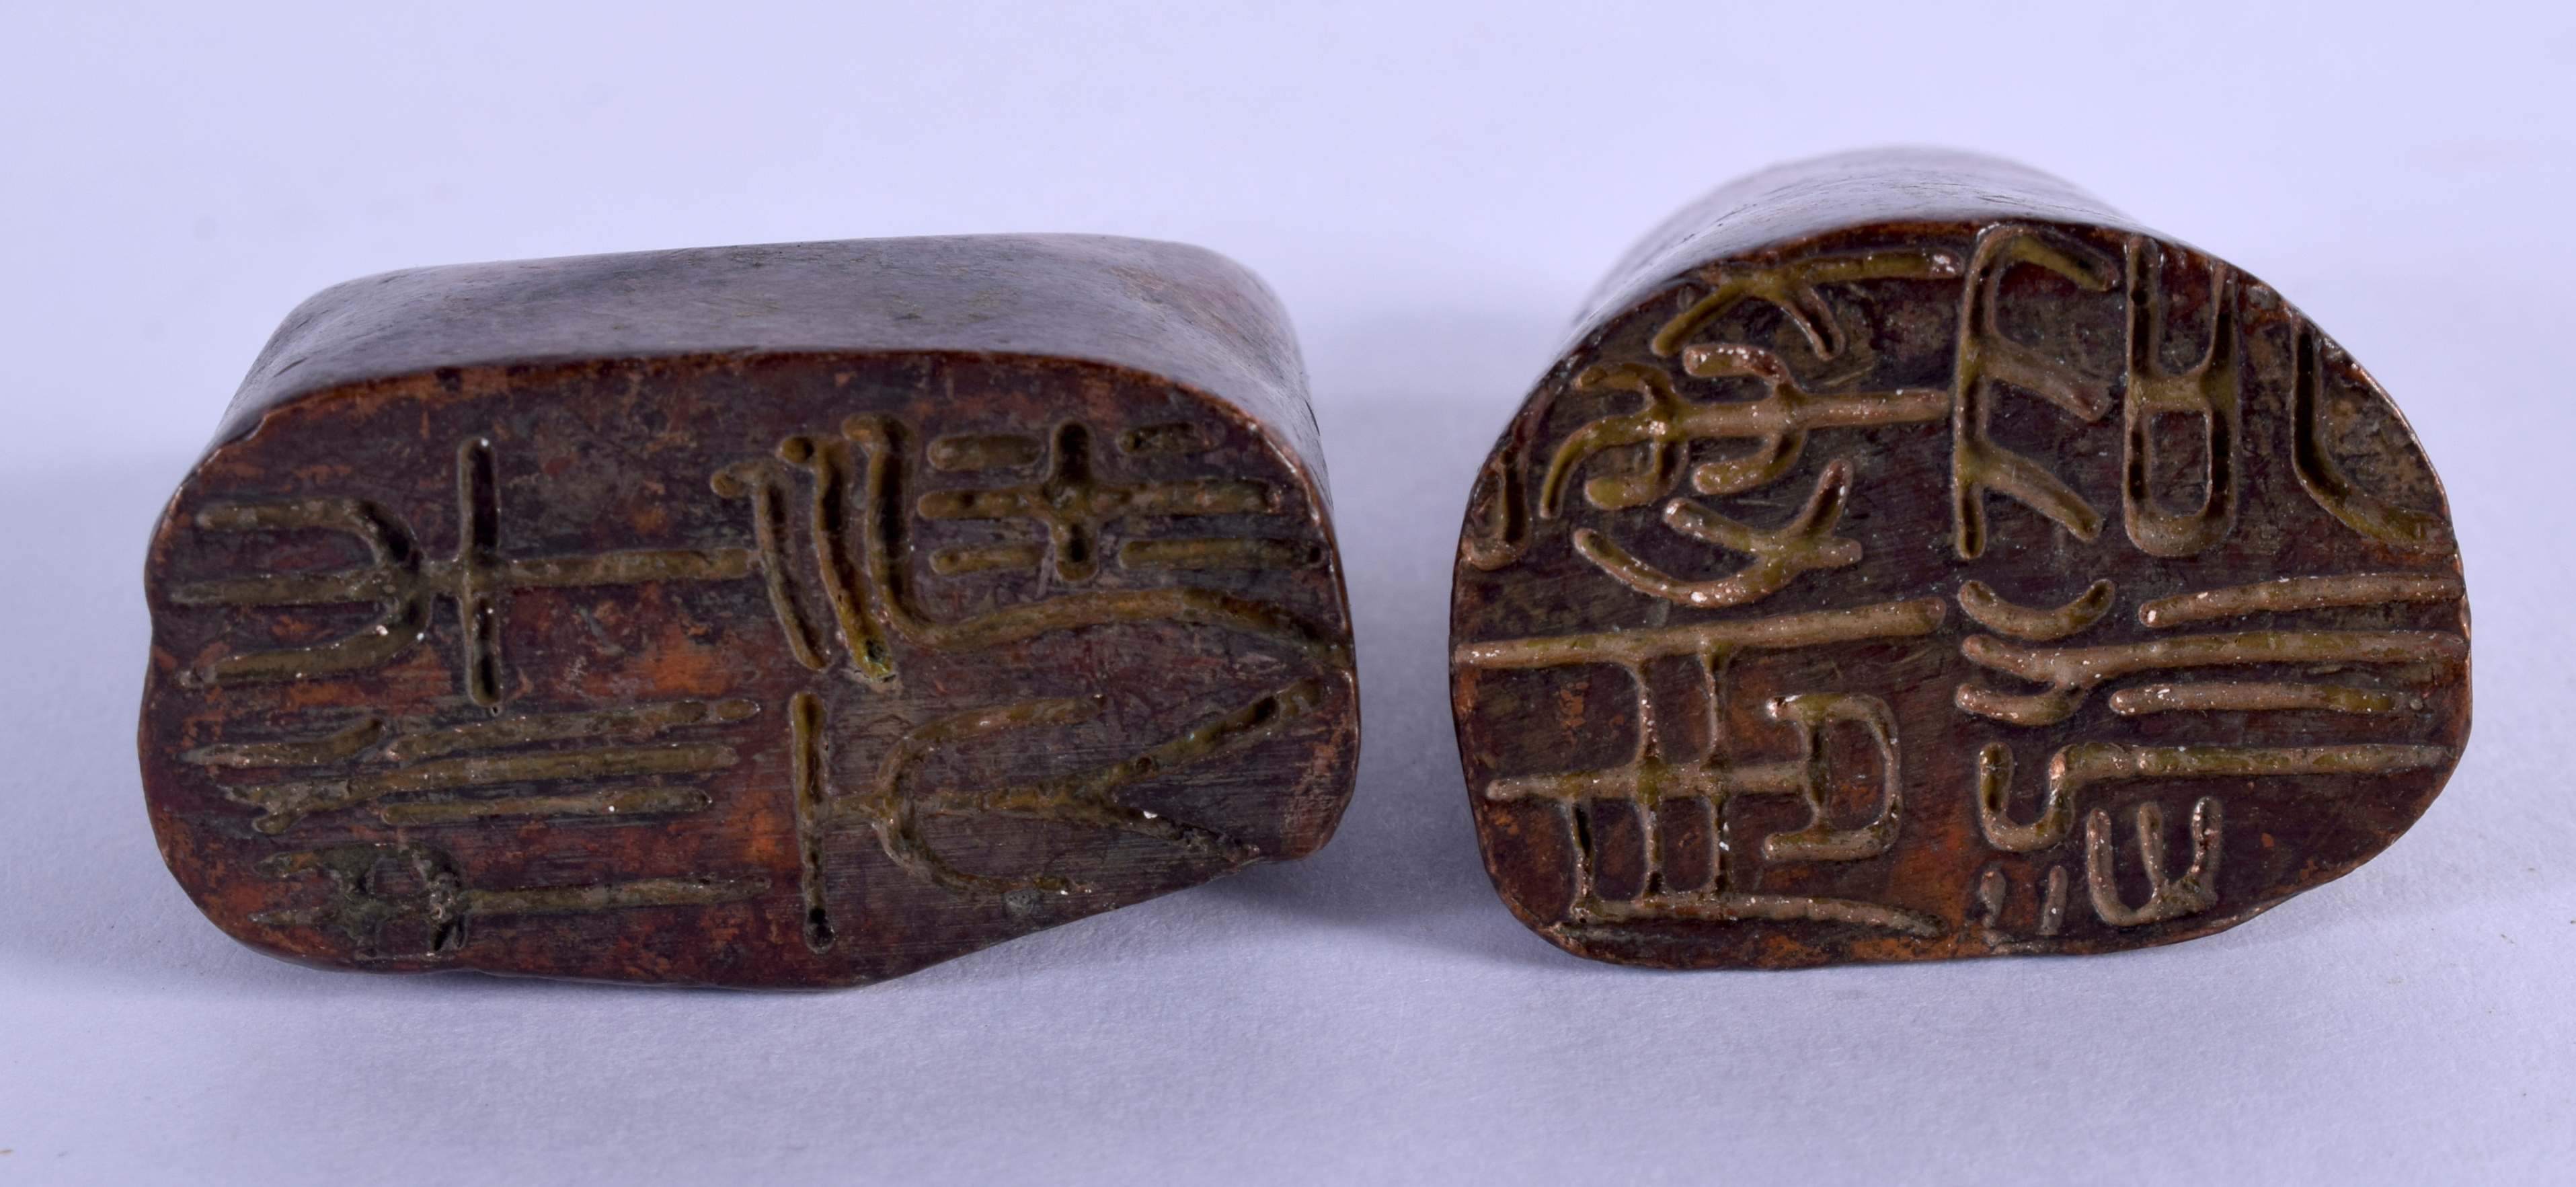 TWO CHINESE BRONZE MOUNTAIN SEALS 20th Century. 3 cm x 3.5 cm. - Image 3 of 3